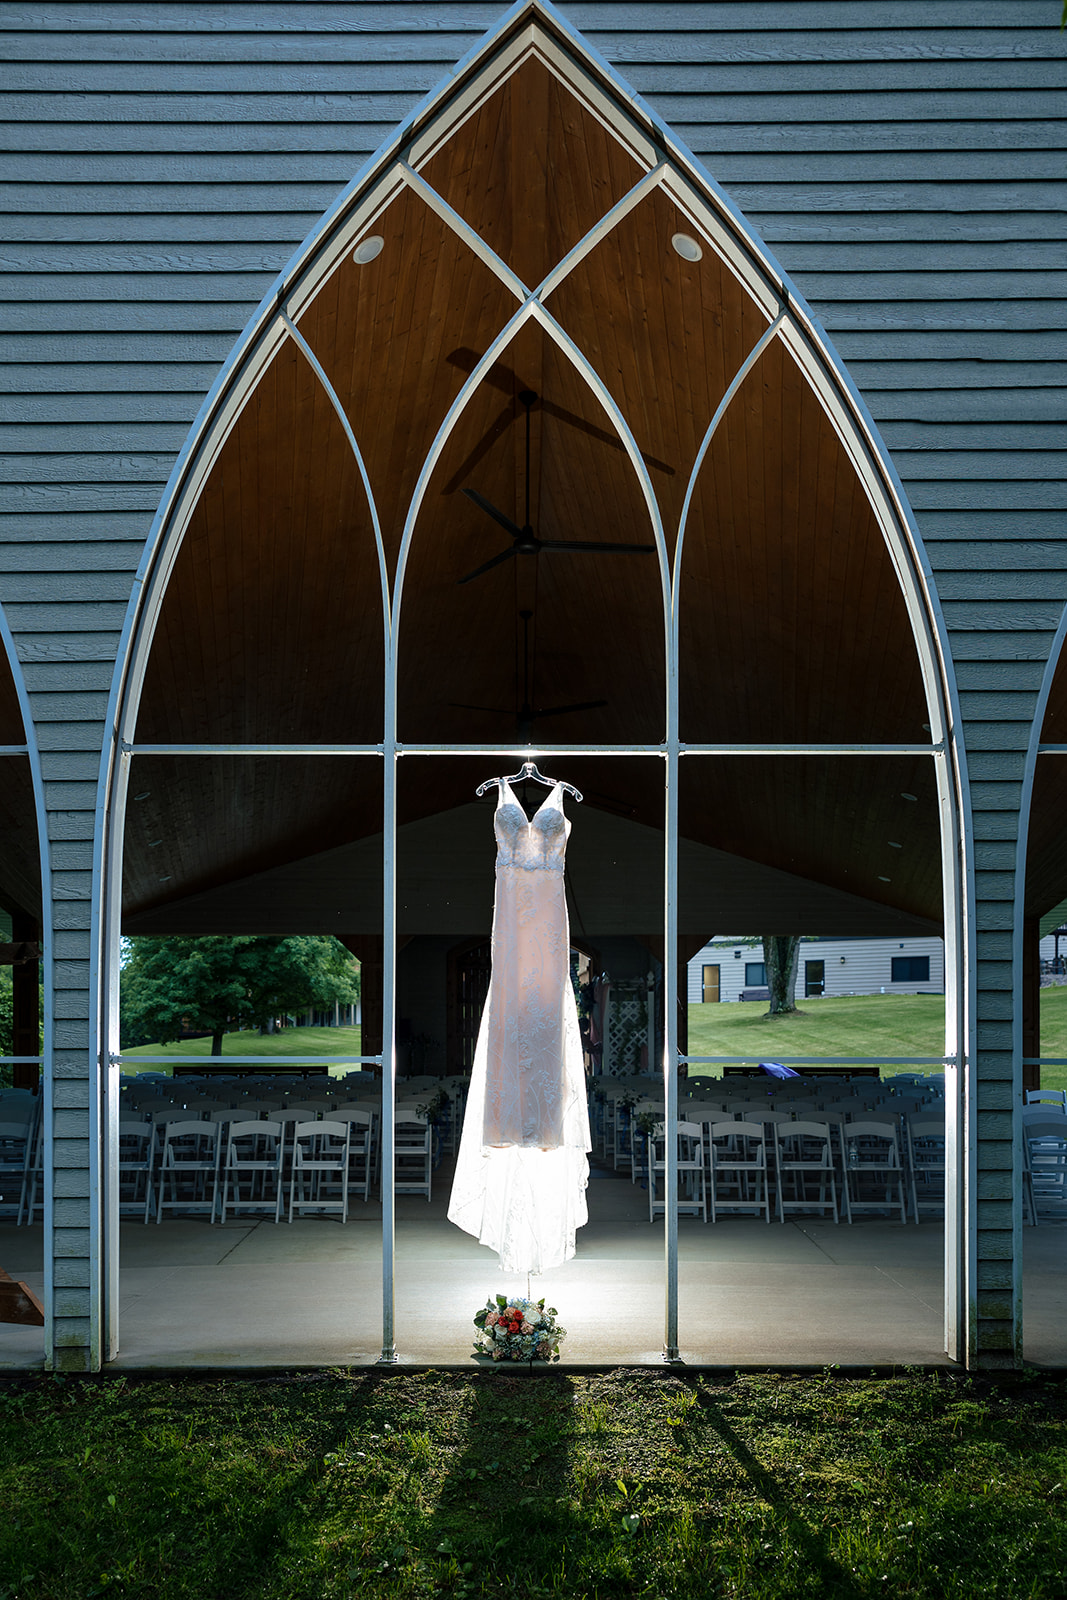 Intimate Winnebago Springs Vows, Caledonia, MN by La Crosse photographer, Jeff Wiswell of J L Wiswell Photography